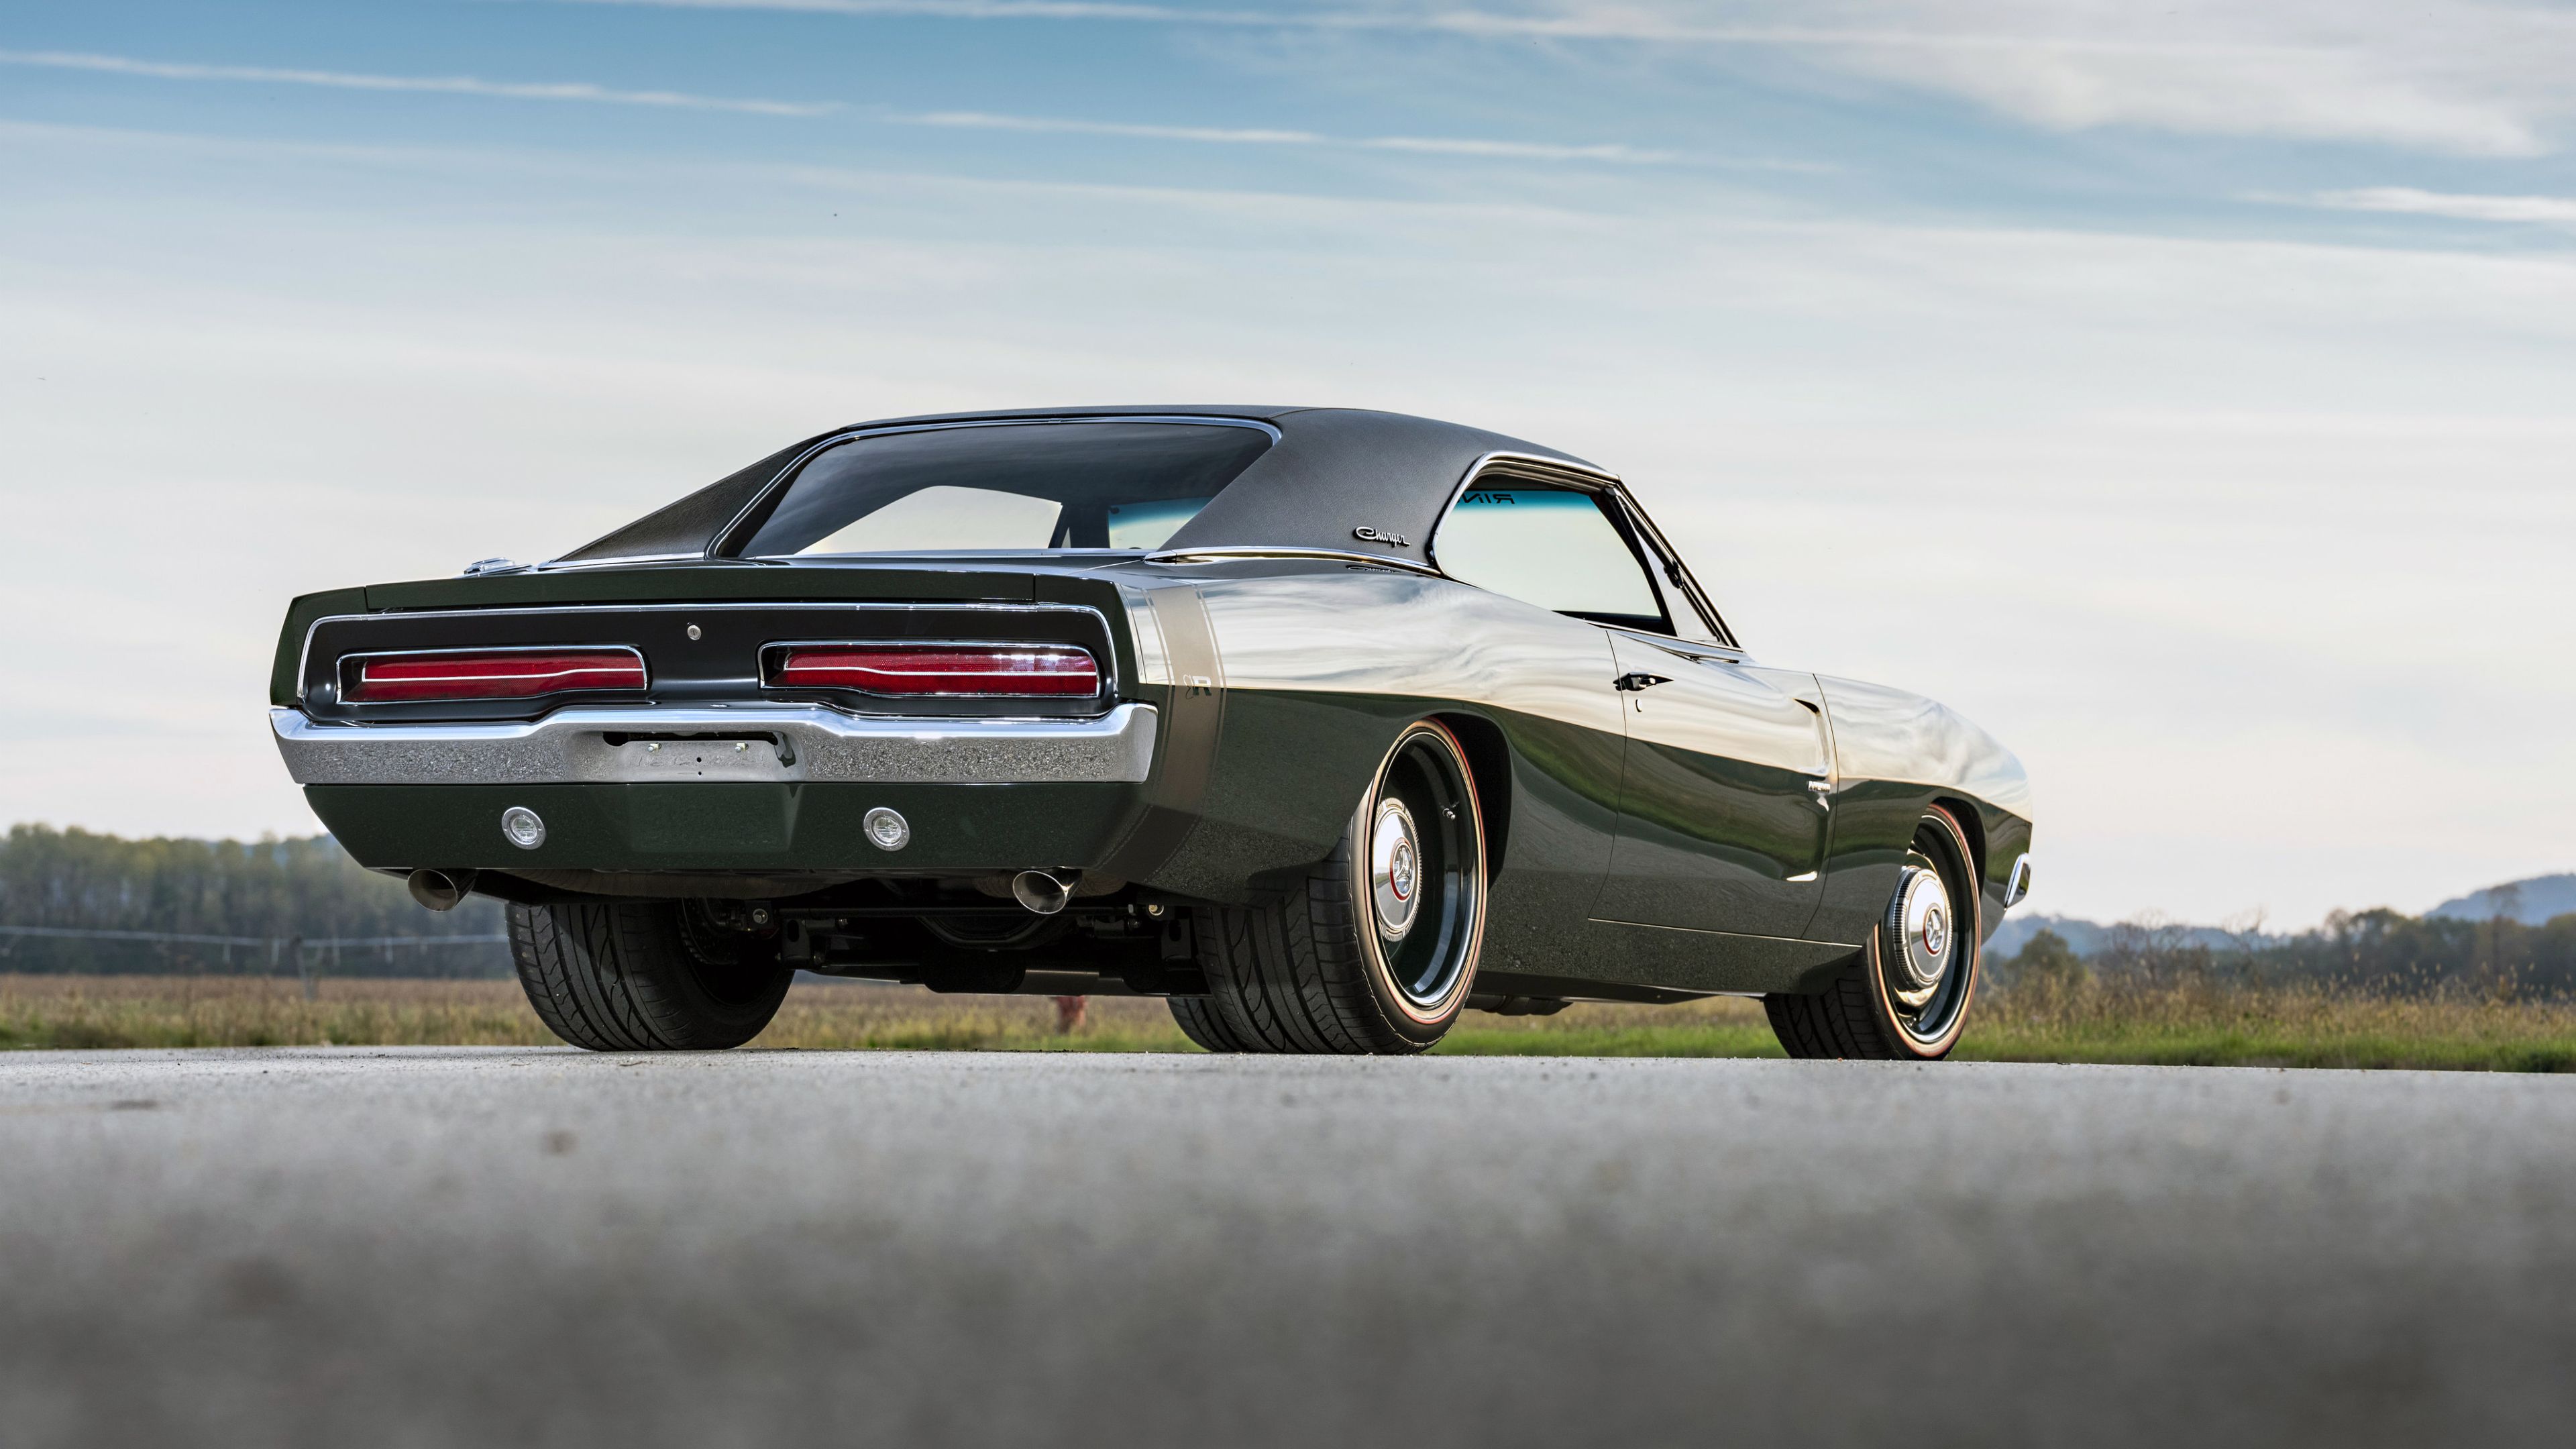 Ringbrothers Dodge Charger Defector Rear Hd Wallpaper, Dodge